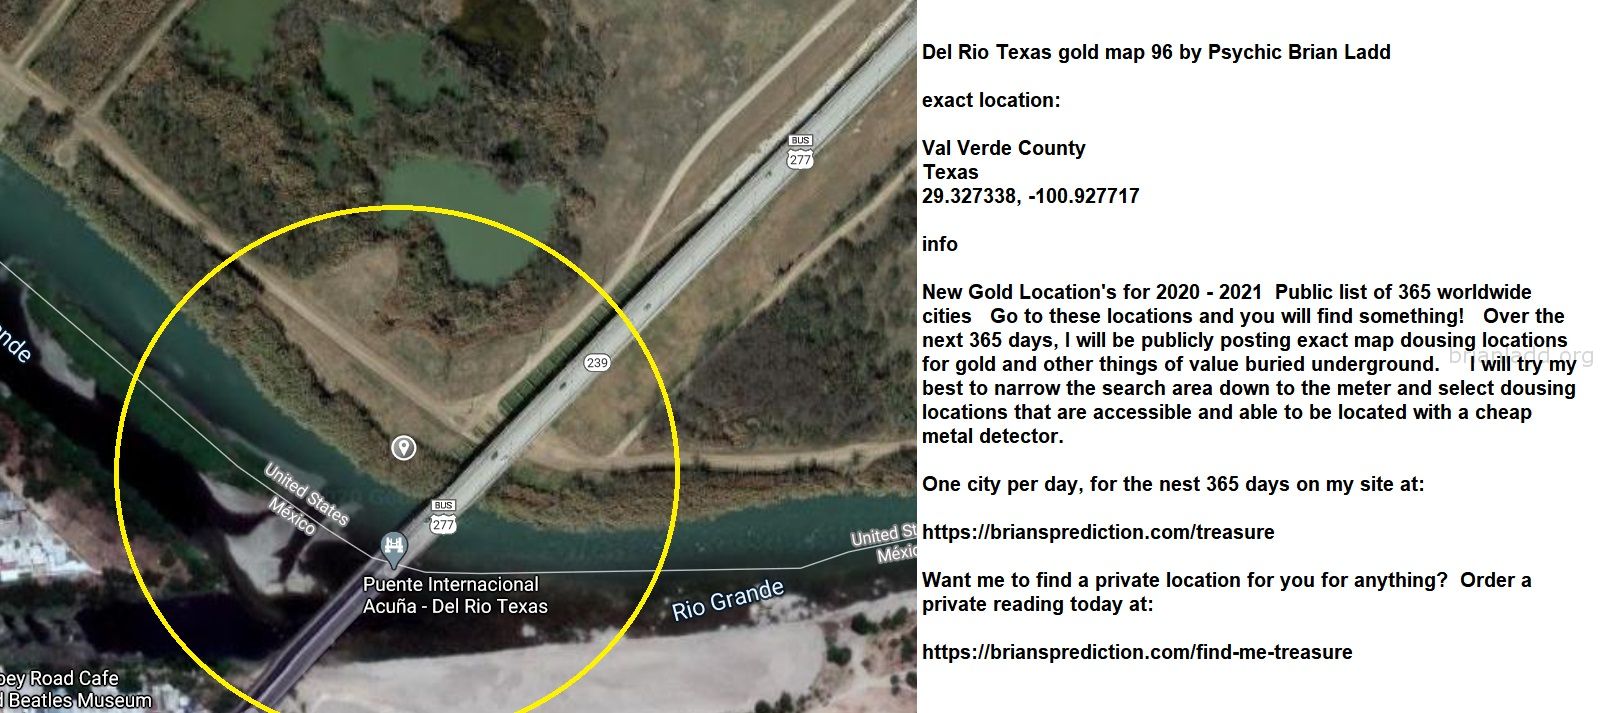 Del Rio Texas Gold Map 96 By Psychic Brian Ladd - Del Rio Texas Gold Map 96 By Psychic Brian Ladd  Exact Location:  Val ...
Del Rio Texas Gold Map 96 By Psychic Brian Ladd  Exact Location:  Val Verde County  Texas  29.327338, -100.927717  Info  New Gold Location'S For 2020 - 2021  Public List Of 365 Worldwide Cities  Go To These Locations And You Will Find Something!  Over The Next 365 Days, I Will Be Publicly Posting Exact Map Dousing Locations For Gold And Other Things Of Value Buried Underground.  I Will Try My Best To Narrow The Search Area Down To The Meter And Select Dousing Locations That Are Accessible And Able To Be Located With A Cheap Metal Detector.  One City Per Day, For The Nest 365 Days On My Site At:   https://briansprediction.com/Treasure  Want Me To Find A Private Location For You For Anything?  Order A Private Reading Today At:   https://briansprediction.com/Find-Me-Treasure
